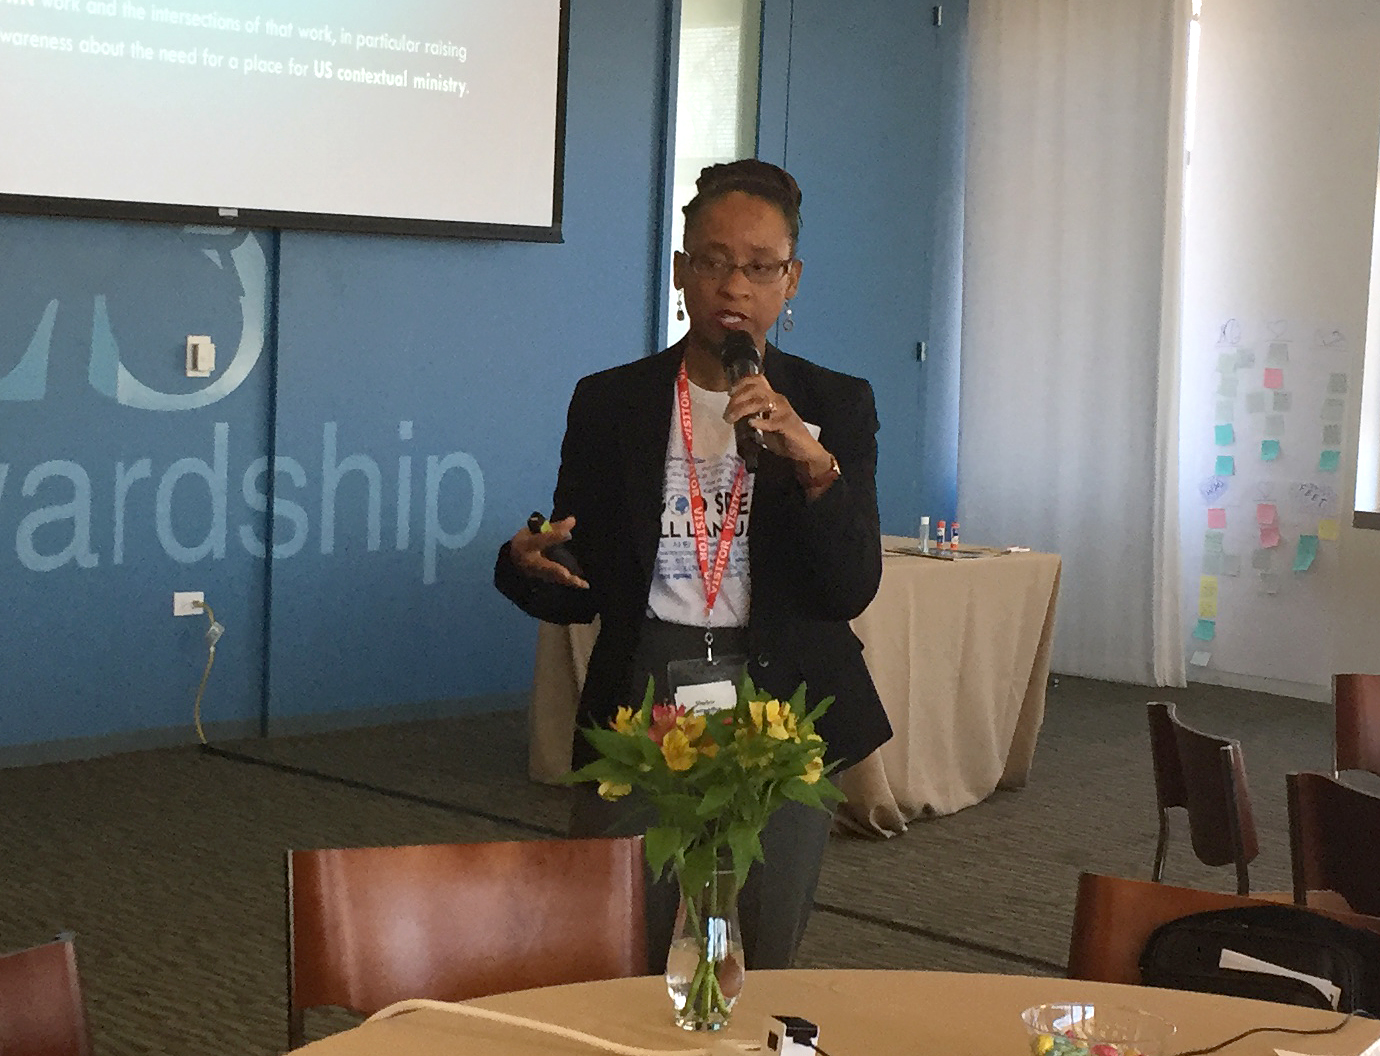 The Rev. Kennetha J. Bigham-Tsai speaks during the April 2018 meeting of the Connectional Table in Chicago. The meeting brought her on board as the body’s chief connectional ministries officer. Photo by Heather Hahn, UMNS.